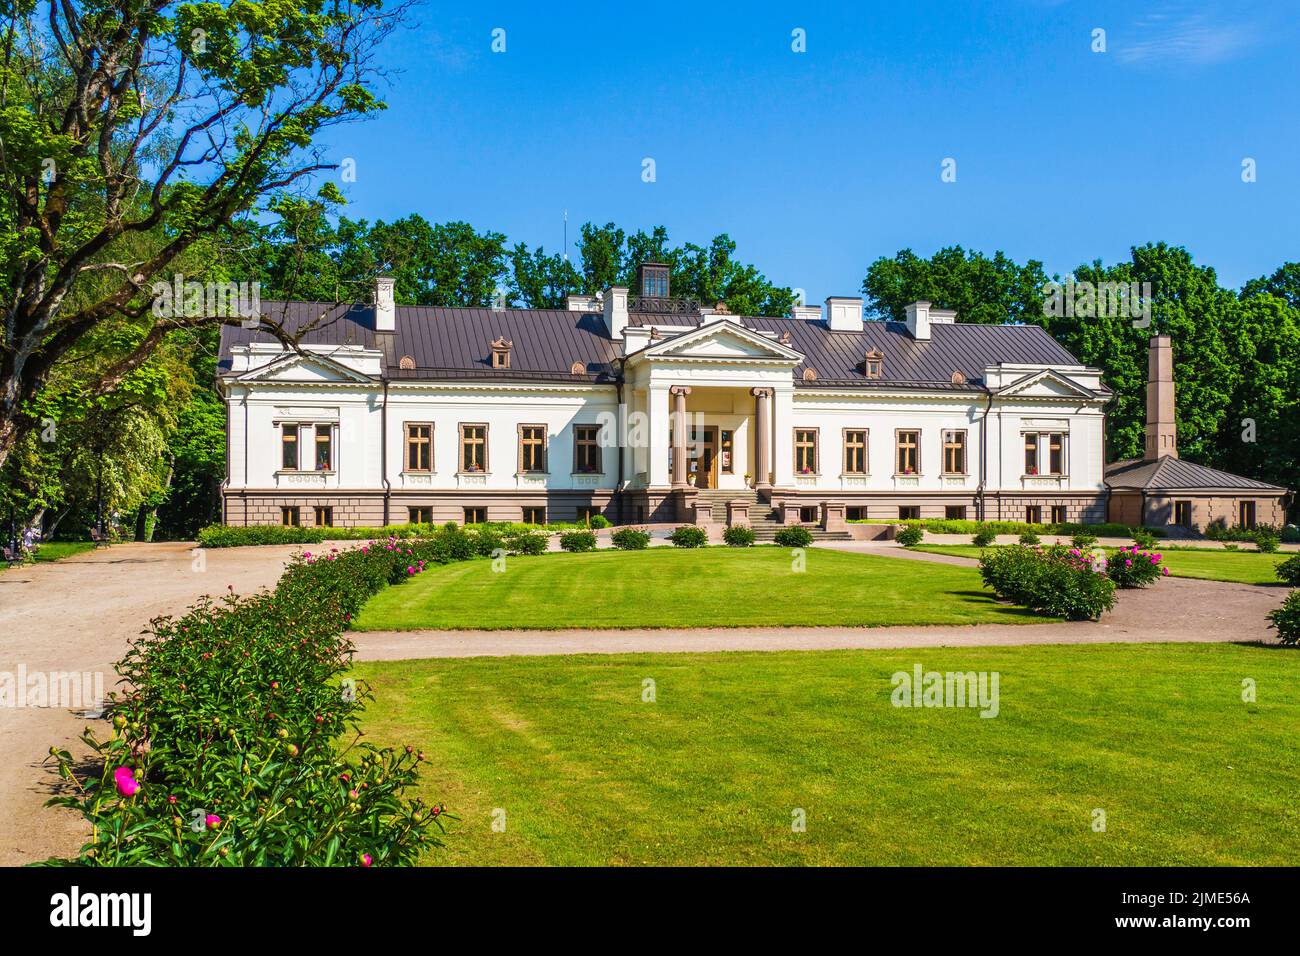 Manor of Gelgaudiskis - an Architectural Ensemble of the 19th Century, Located in Sakiai District, Lithuania Stock Photo